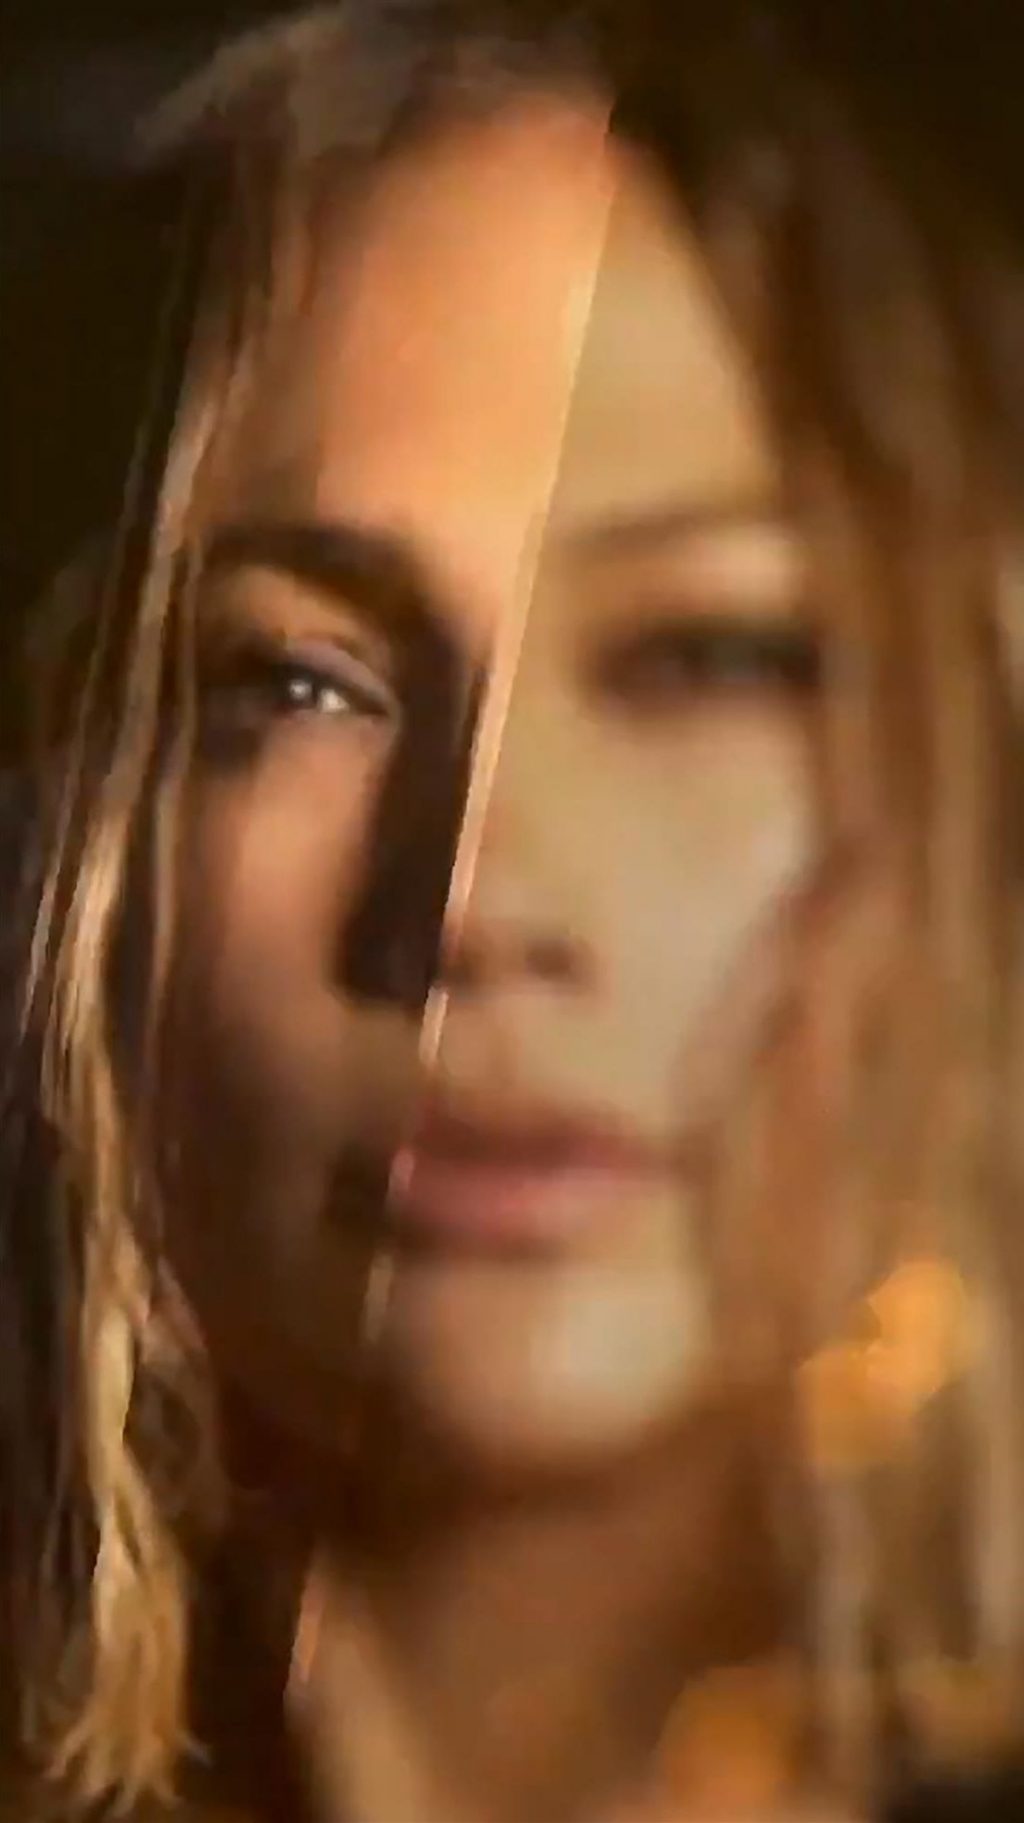 Jennifer Lopez is Naked in Her New Music Video Teaser (22 Pics + Video)